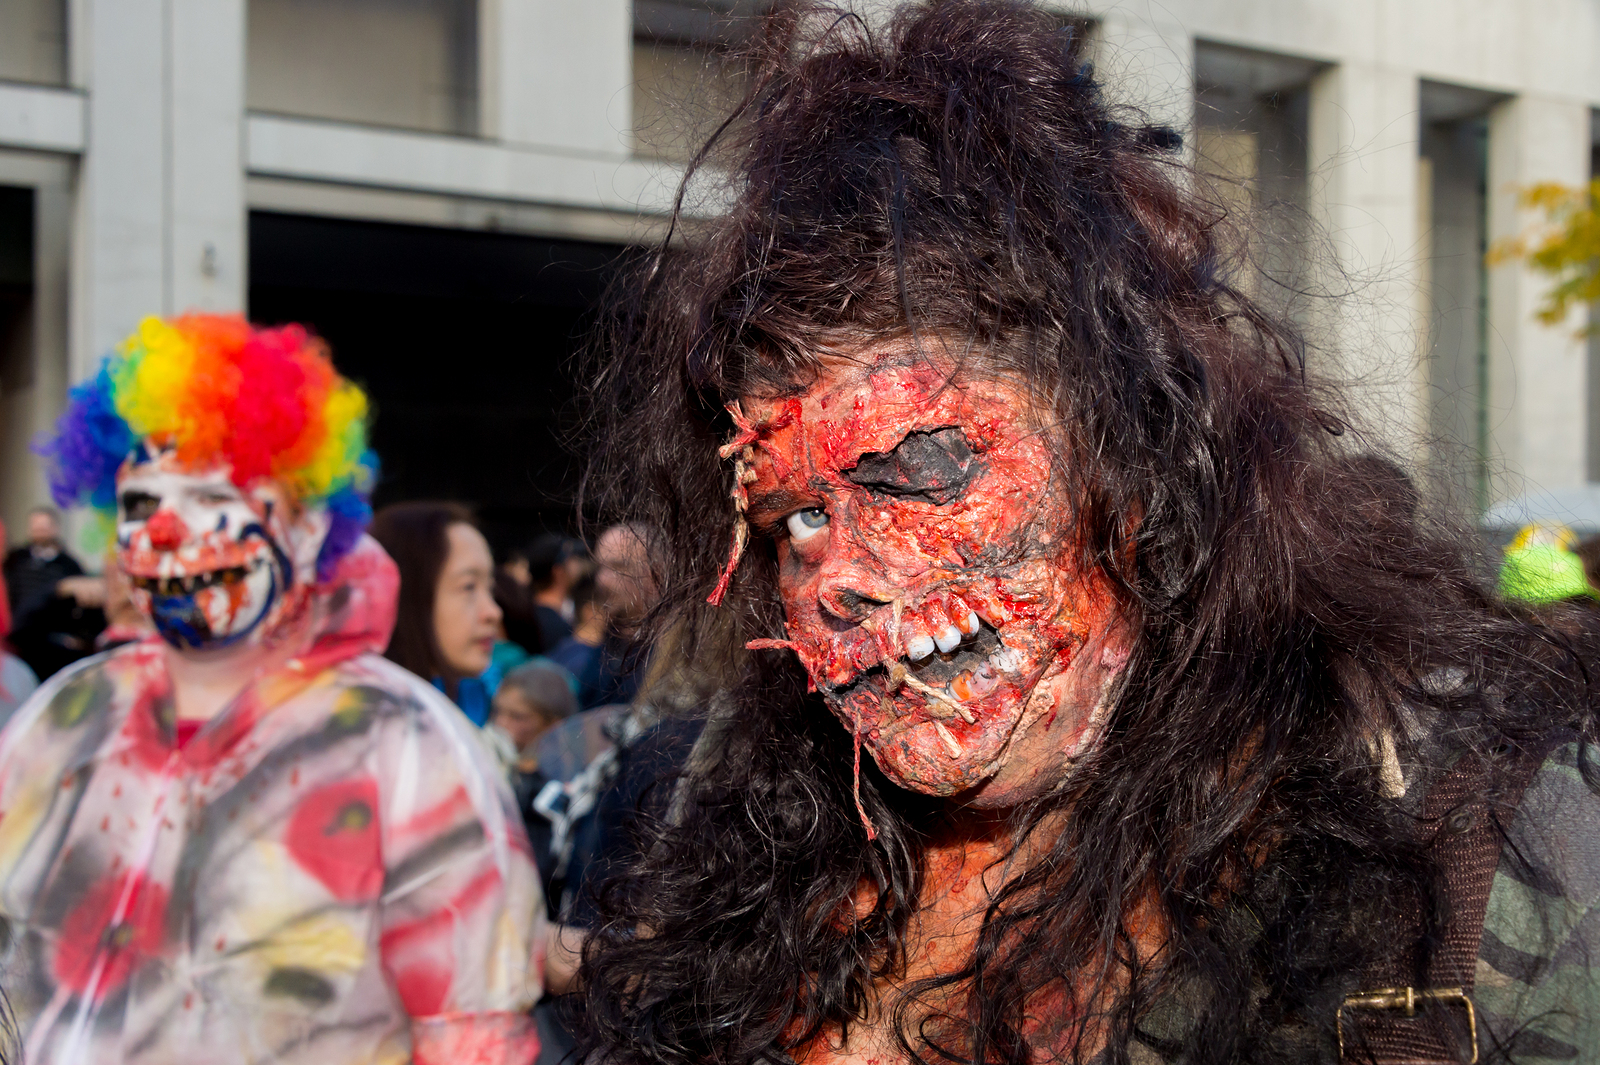 Zombie Attractions To Visit In UK